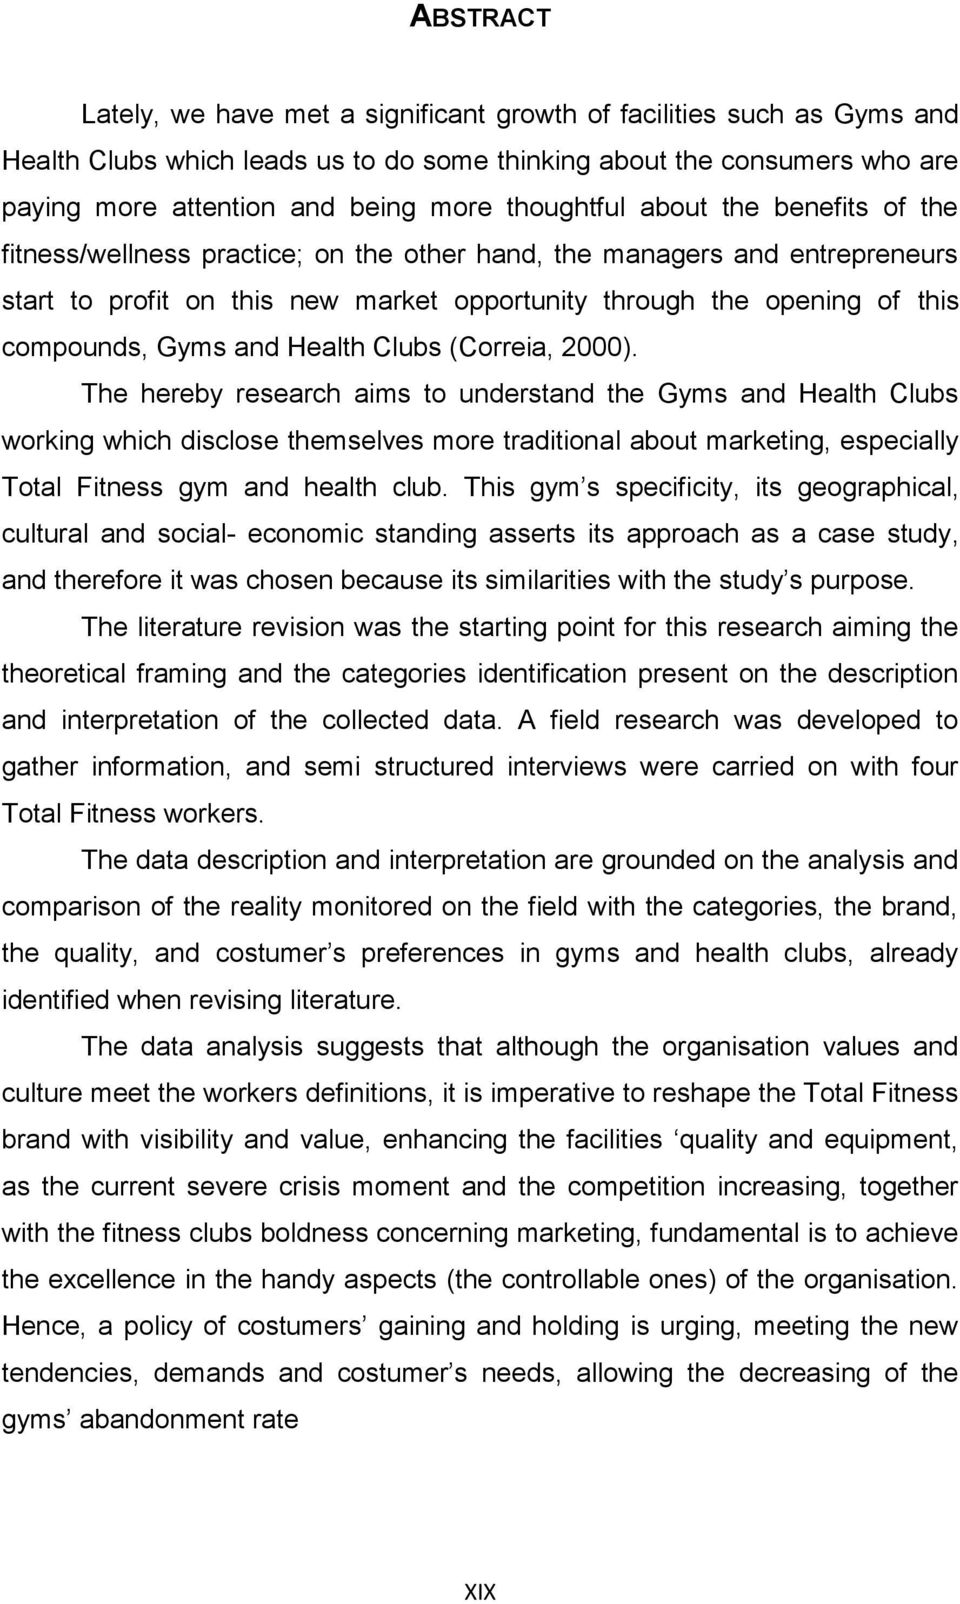 Gyms and Health Clubs (Correia, 2000).